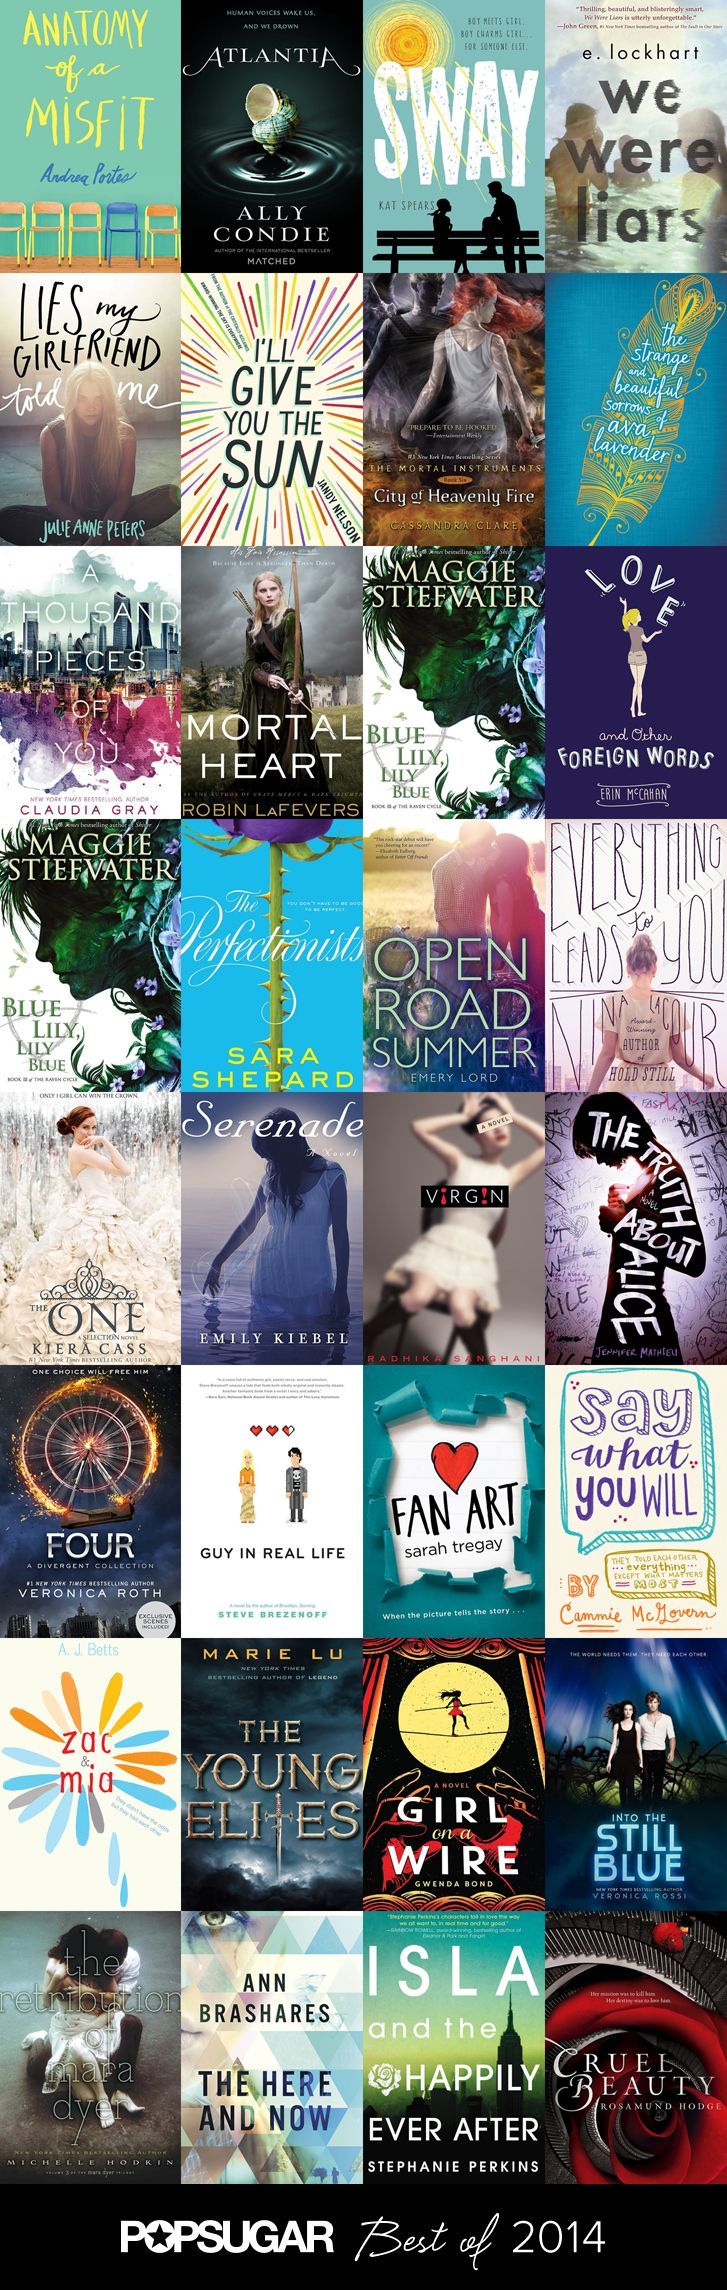 The Best YA Books of 2014. Ohmigosh ive read or want to read *almost* every one of these